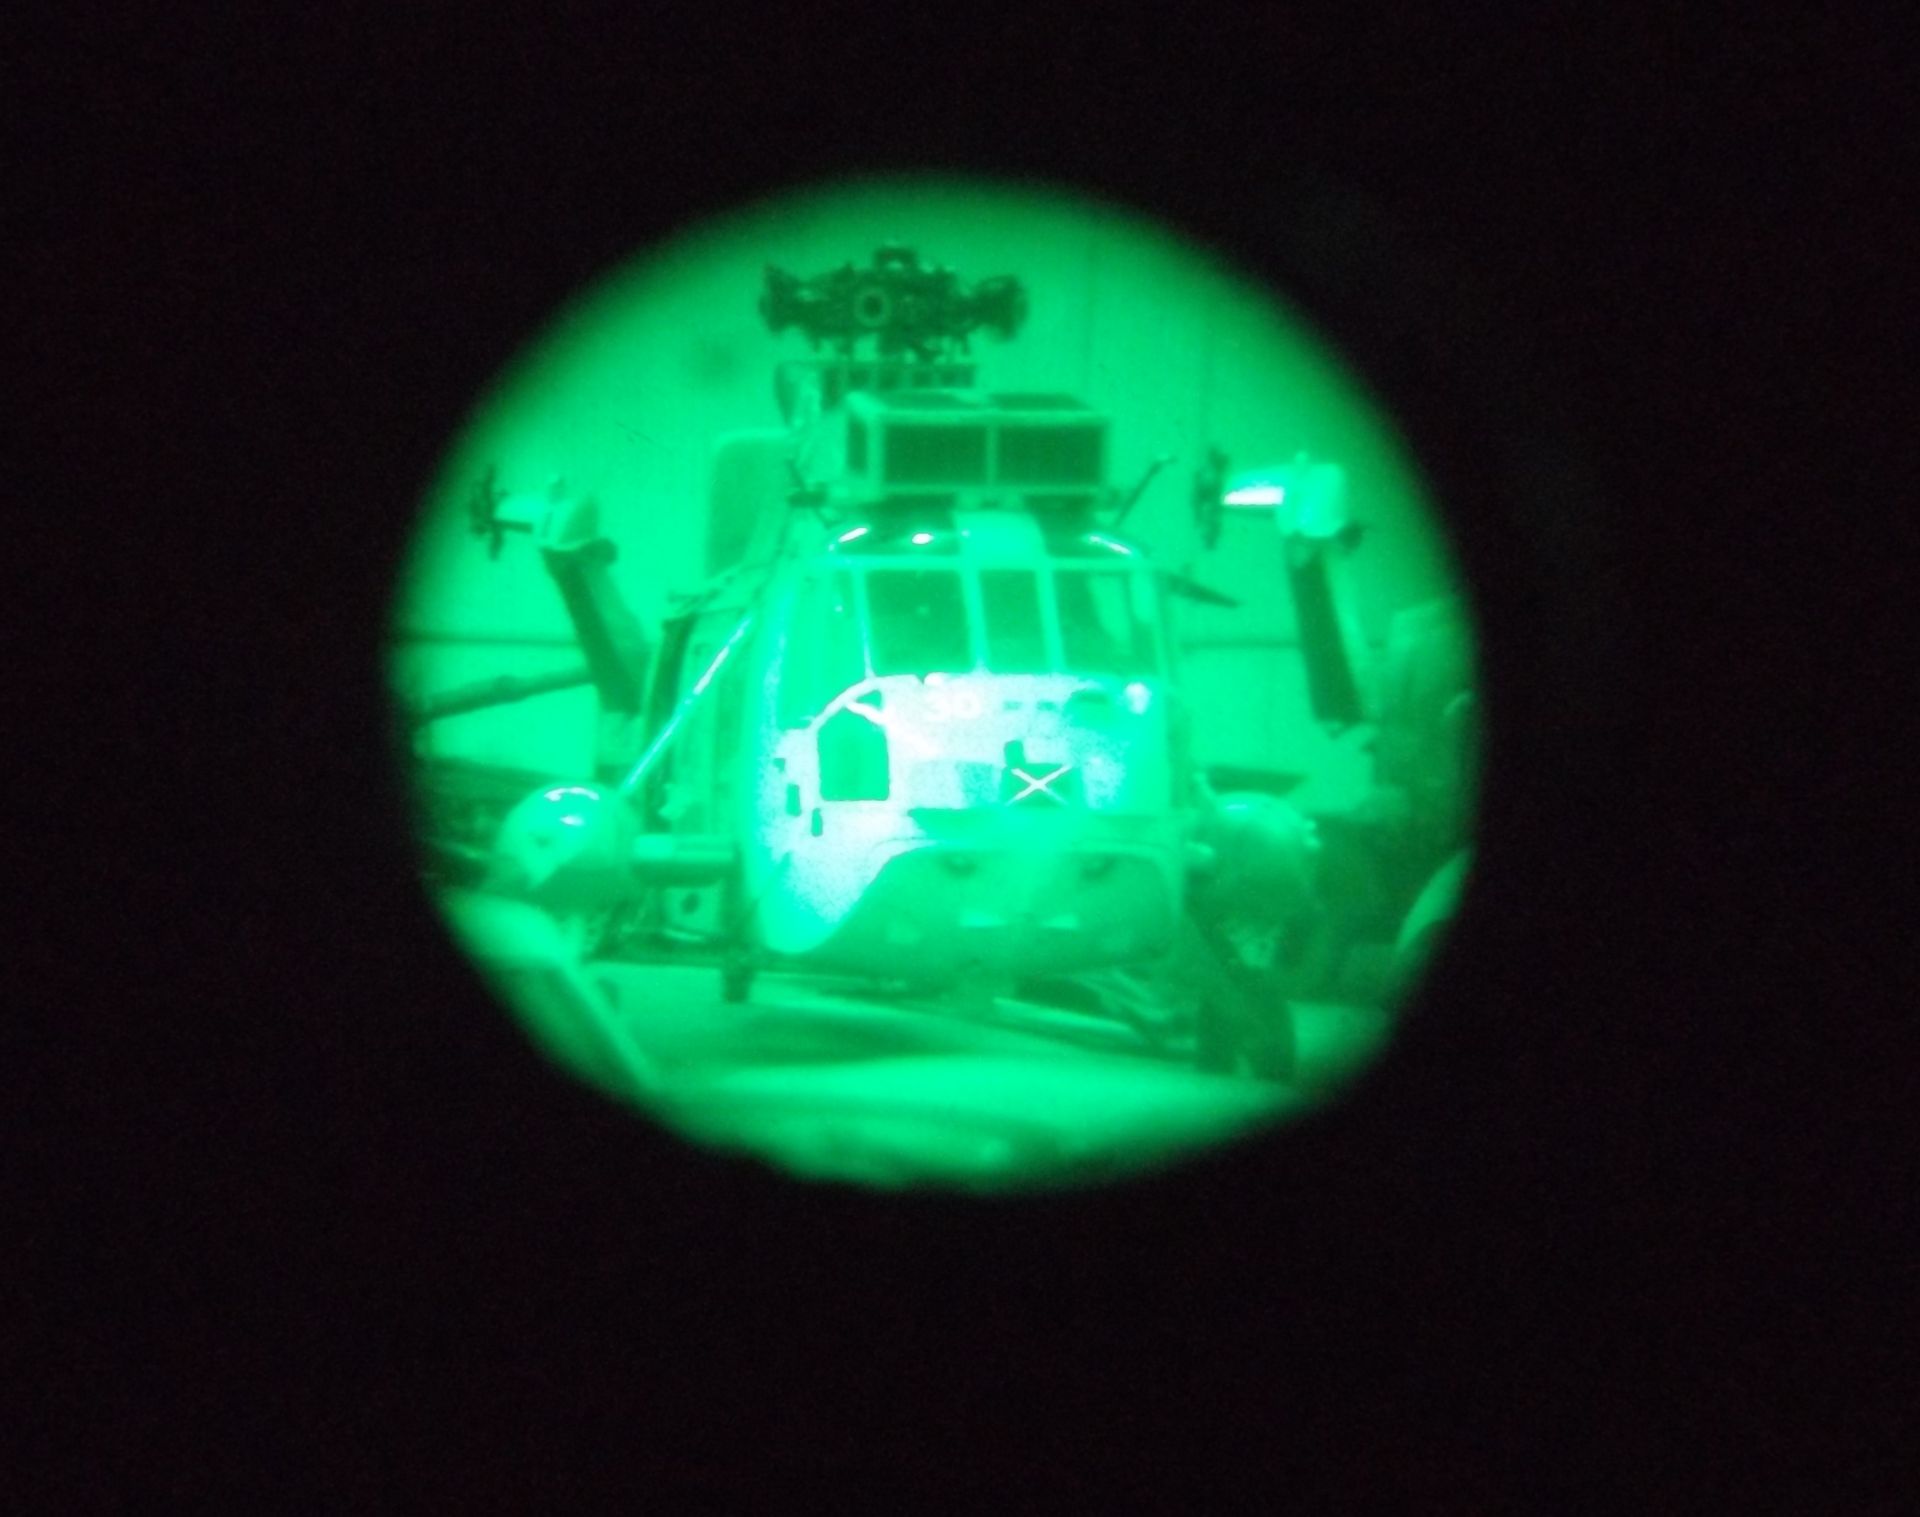 Telescope Straight Image Intensified L6A1 Scope - British Military Night Vision Pocket Scope - Image 7 of 8